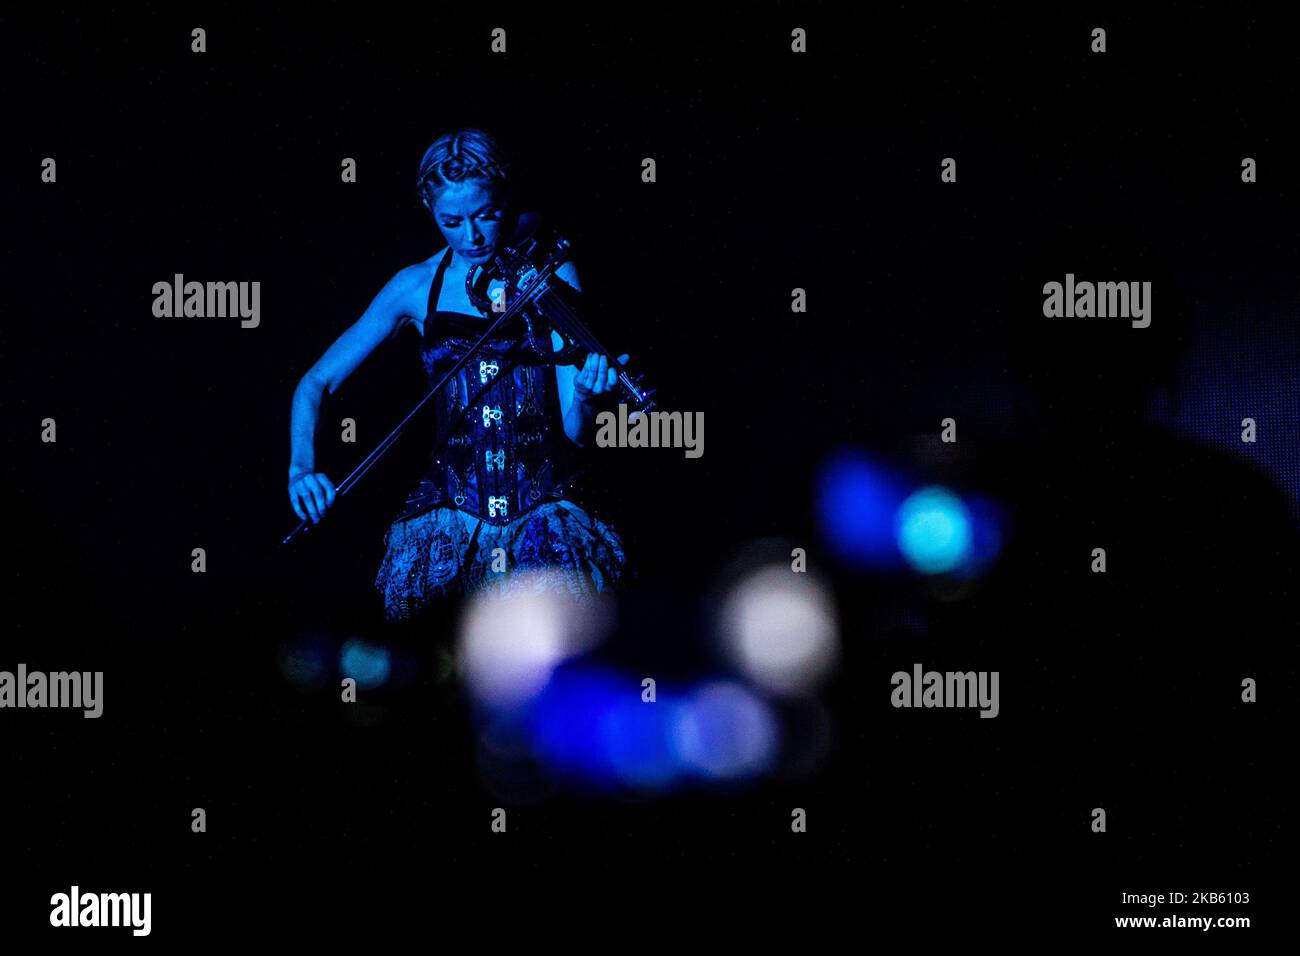 American violinist, singer and songwriter Lindsey Stirling performs live at Alcatraz in Milano, Italy, on September 14 2019. Lindsey Stirling has been named in Forbes magazine's 30 Under 30 In Music: The Class Of 2015. Forbes notes her quarter-finalist position on America's Got Talent season five in 2010, a No. 2 position on the Billboard 200 for her second album Shatter Me in 2014, and her 11 million subscribers on YouTube. (Photo by Mairo Cinquetti/NurPhoto) Stock Photo